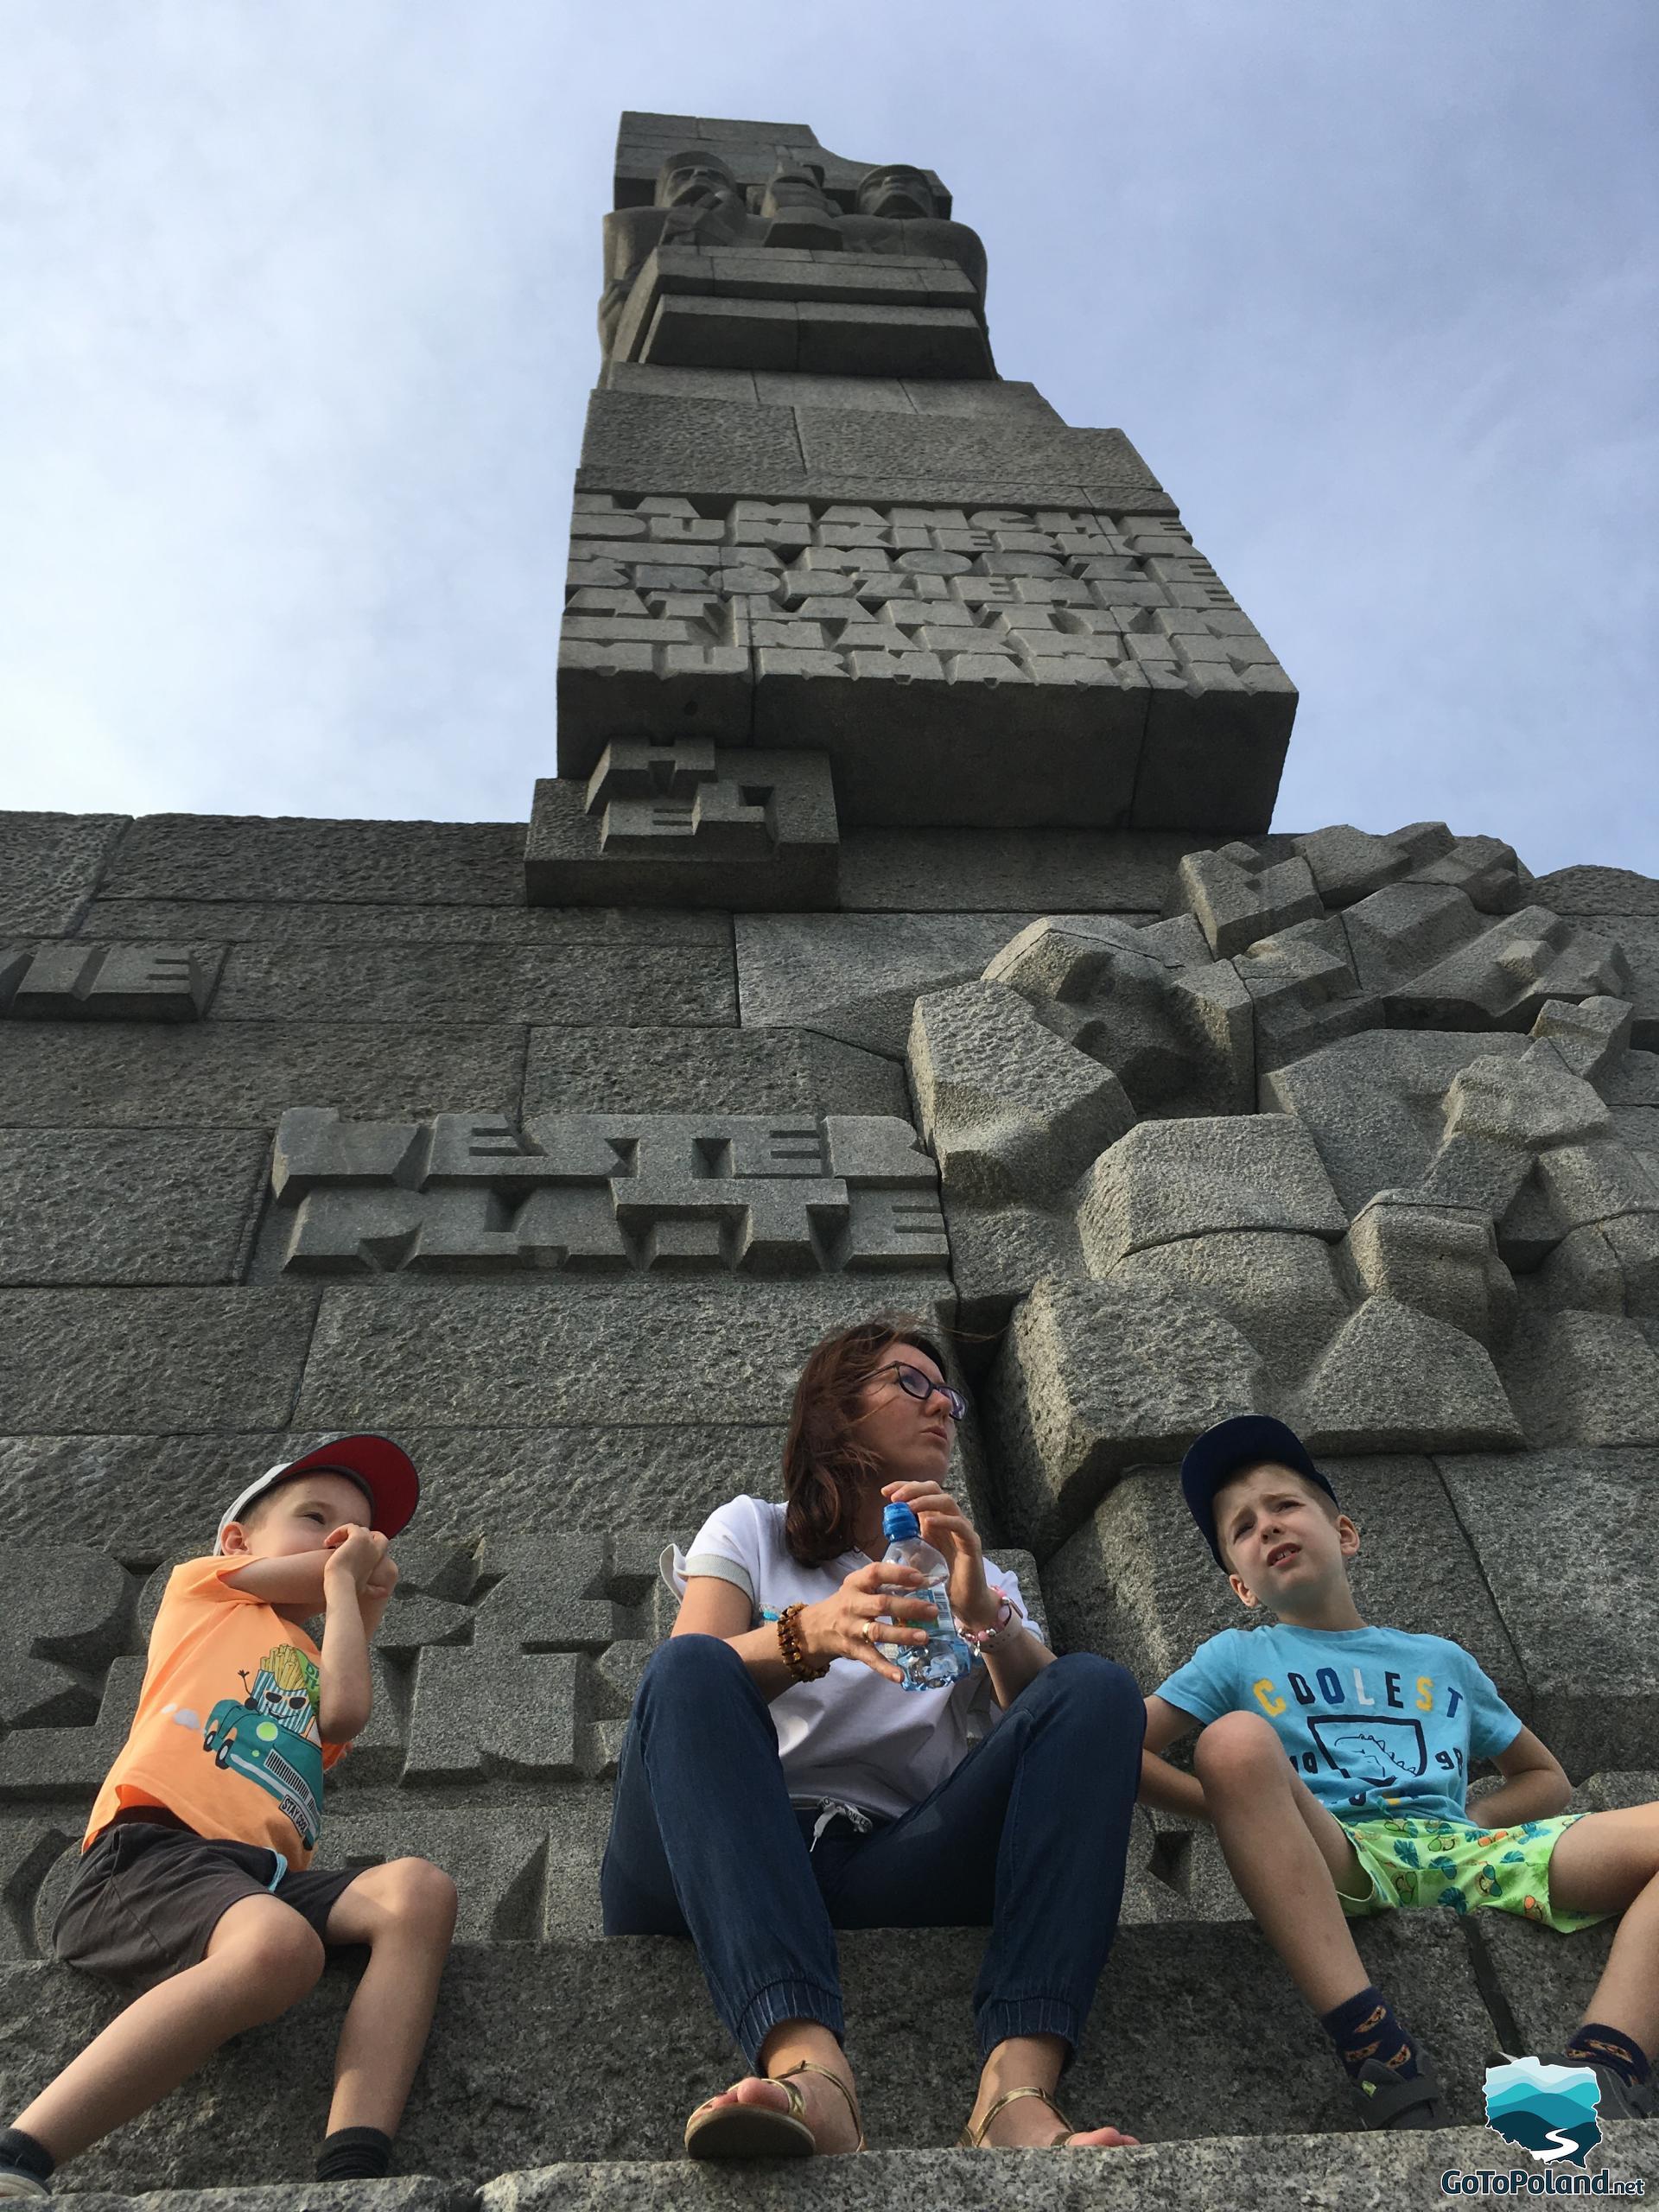 a woman and two children are sitting at the feet of a large monument